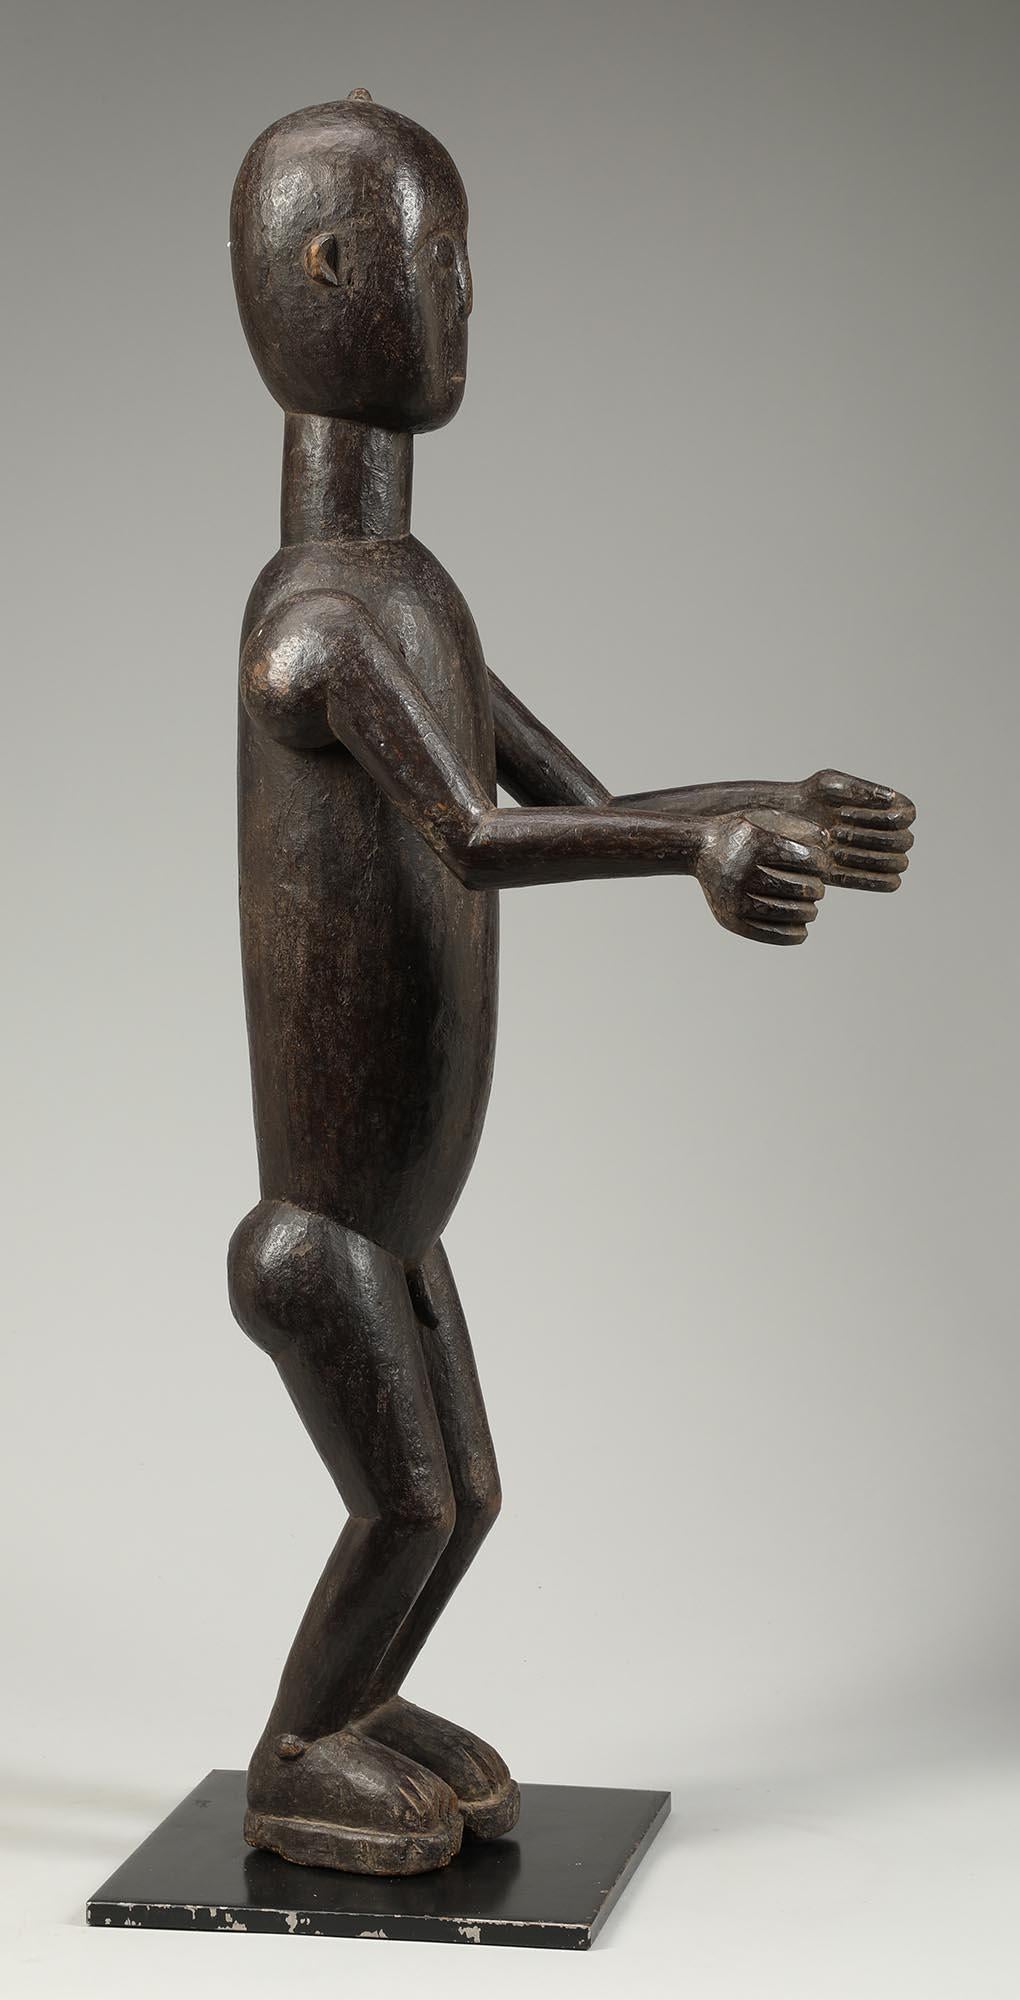 Abron Drum Attendant standing figure with both arms out front. From Ghana, early 20th century. Rich, dark patina to the surface.
A wonderful streamlined (really Art Deco in feeling) or cubist style dancing male figure from a drum ensemble. The